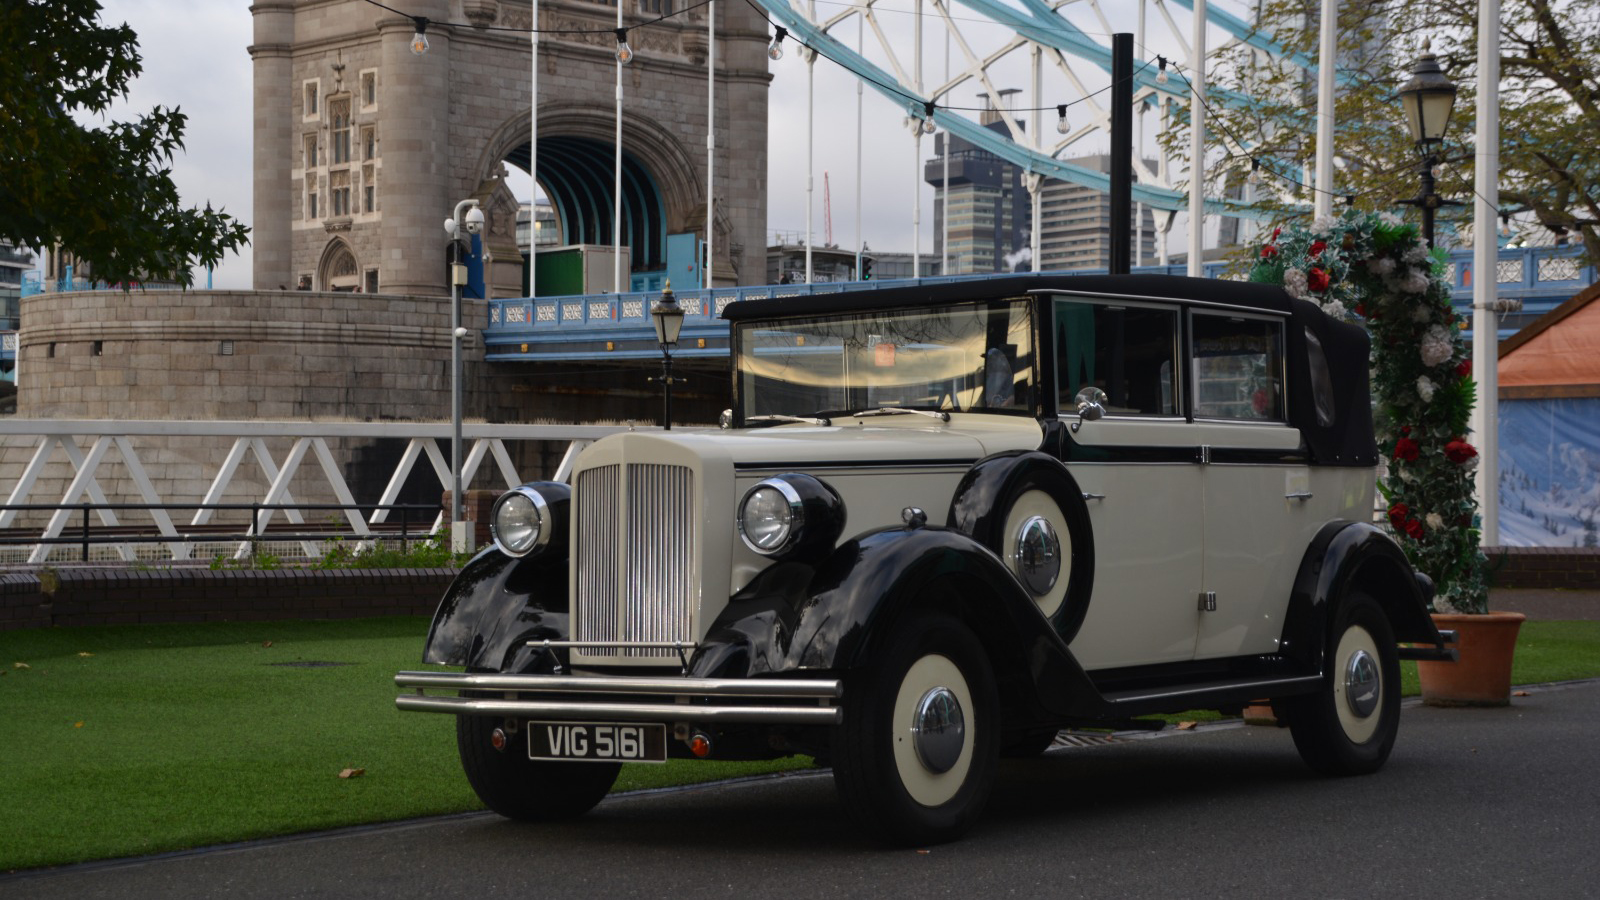 1930's vintage style regent parked in front of the London bridge. Vehicle is ivory with black wheel arches and a convertible soft-top roof.